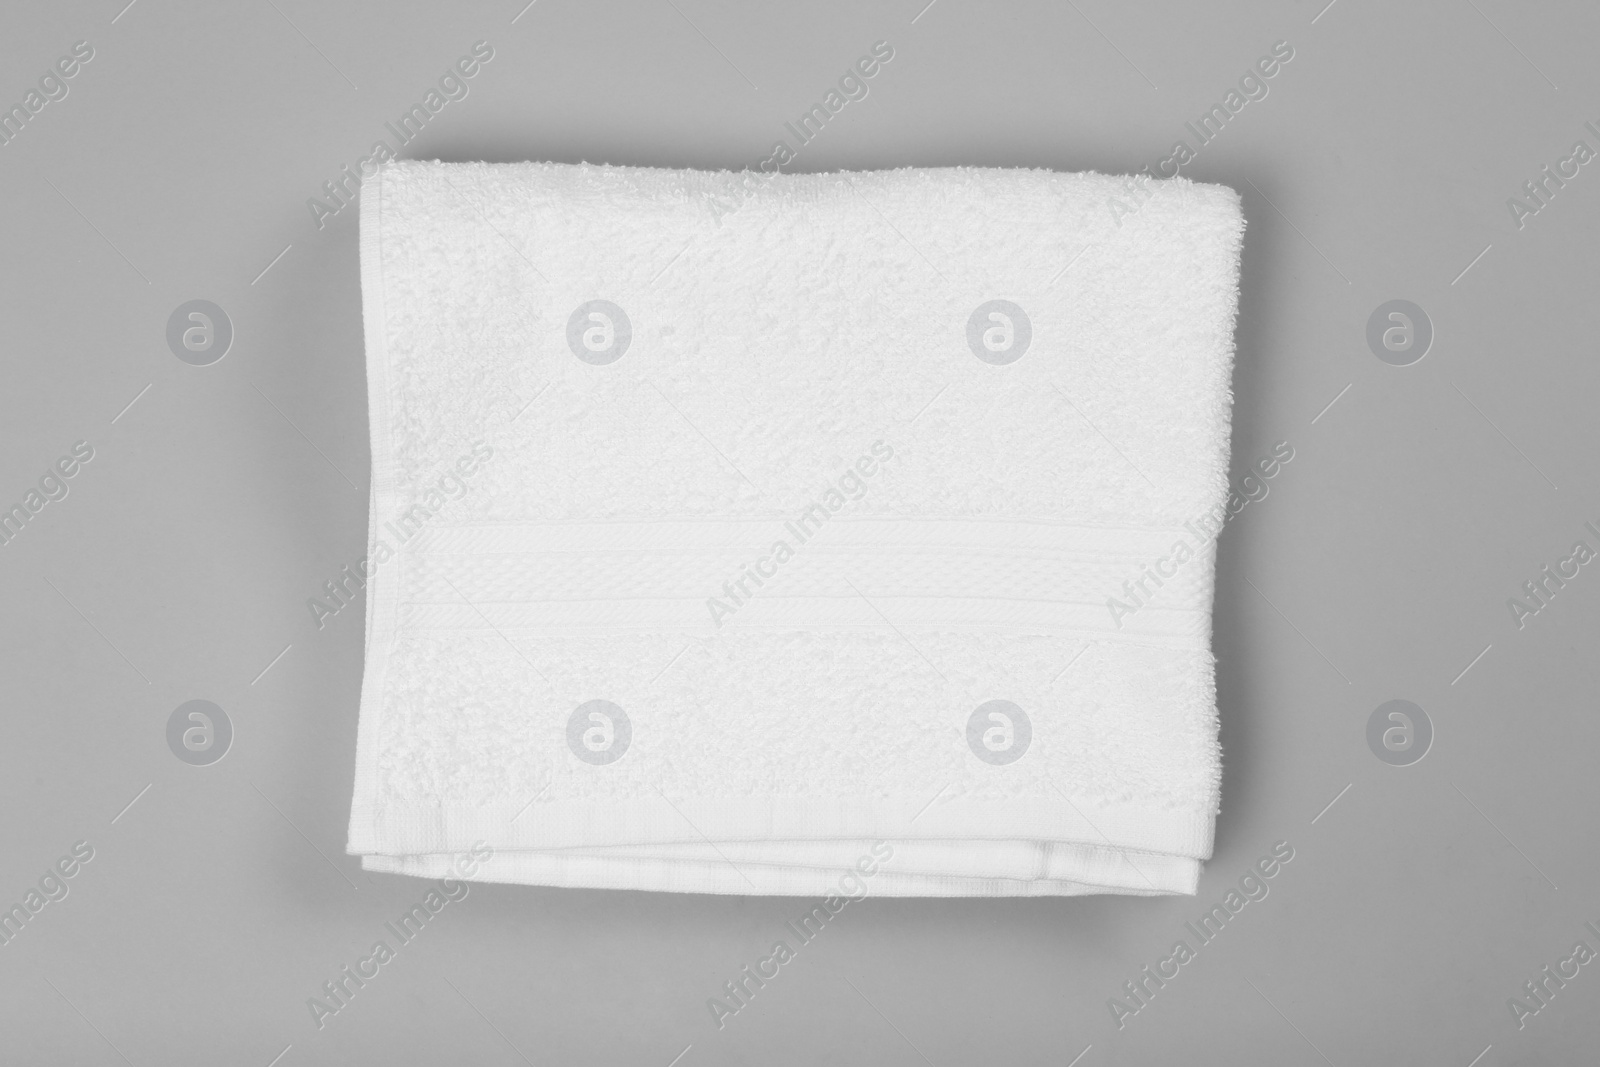 Photo of Folded white beach towel on light grey background, top view